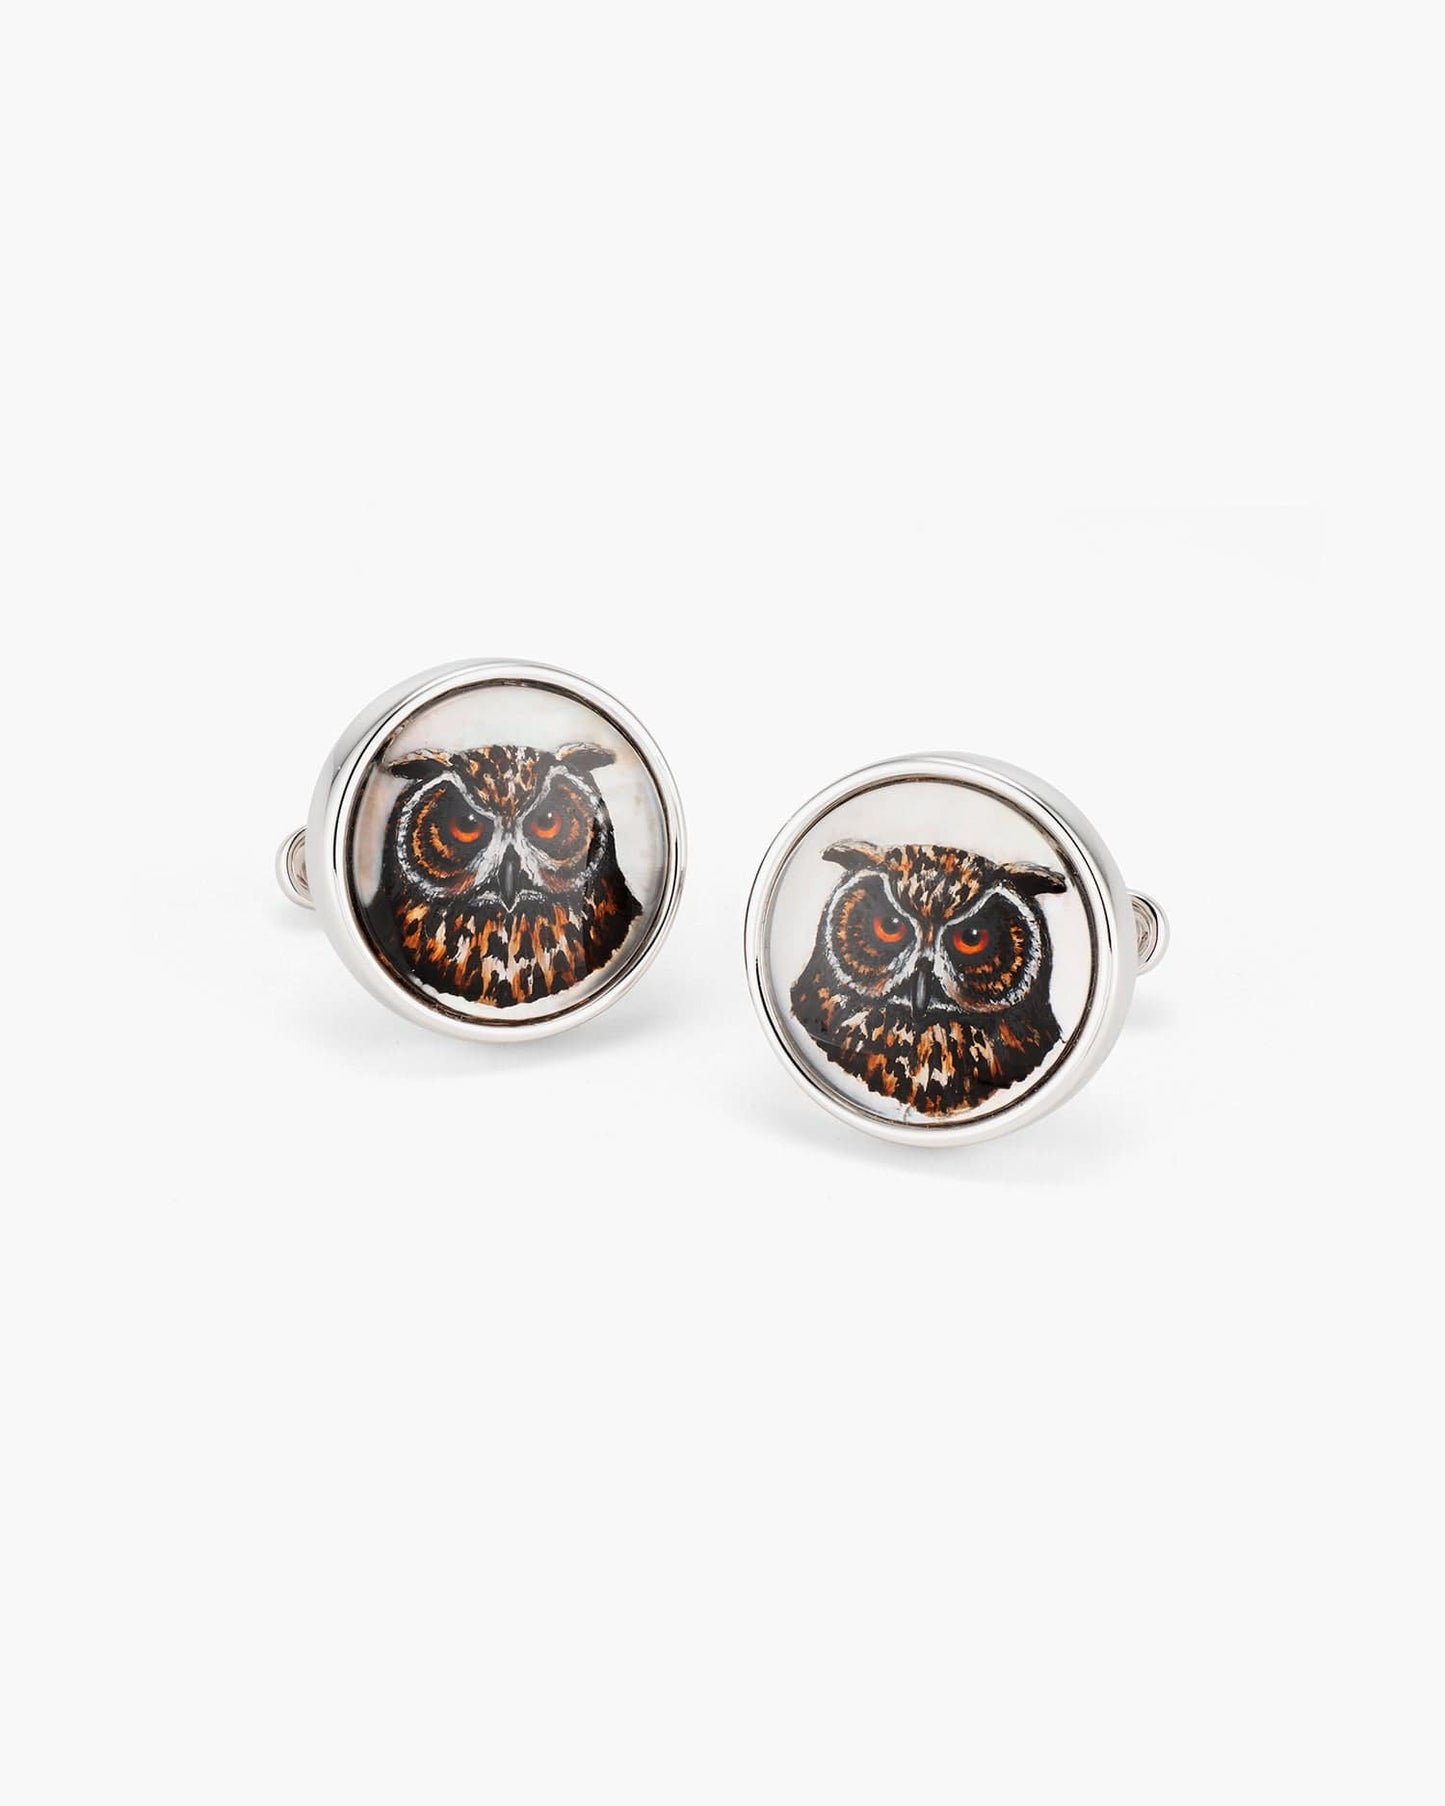 Mother of Pearl and Crystal Hand Painted Owl Cufflinks